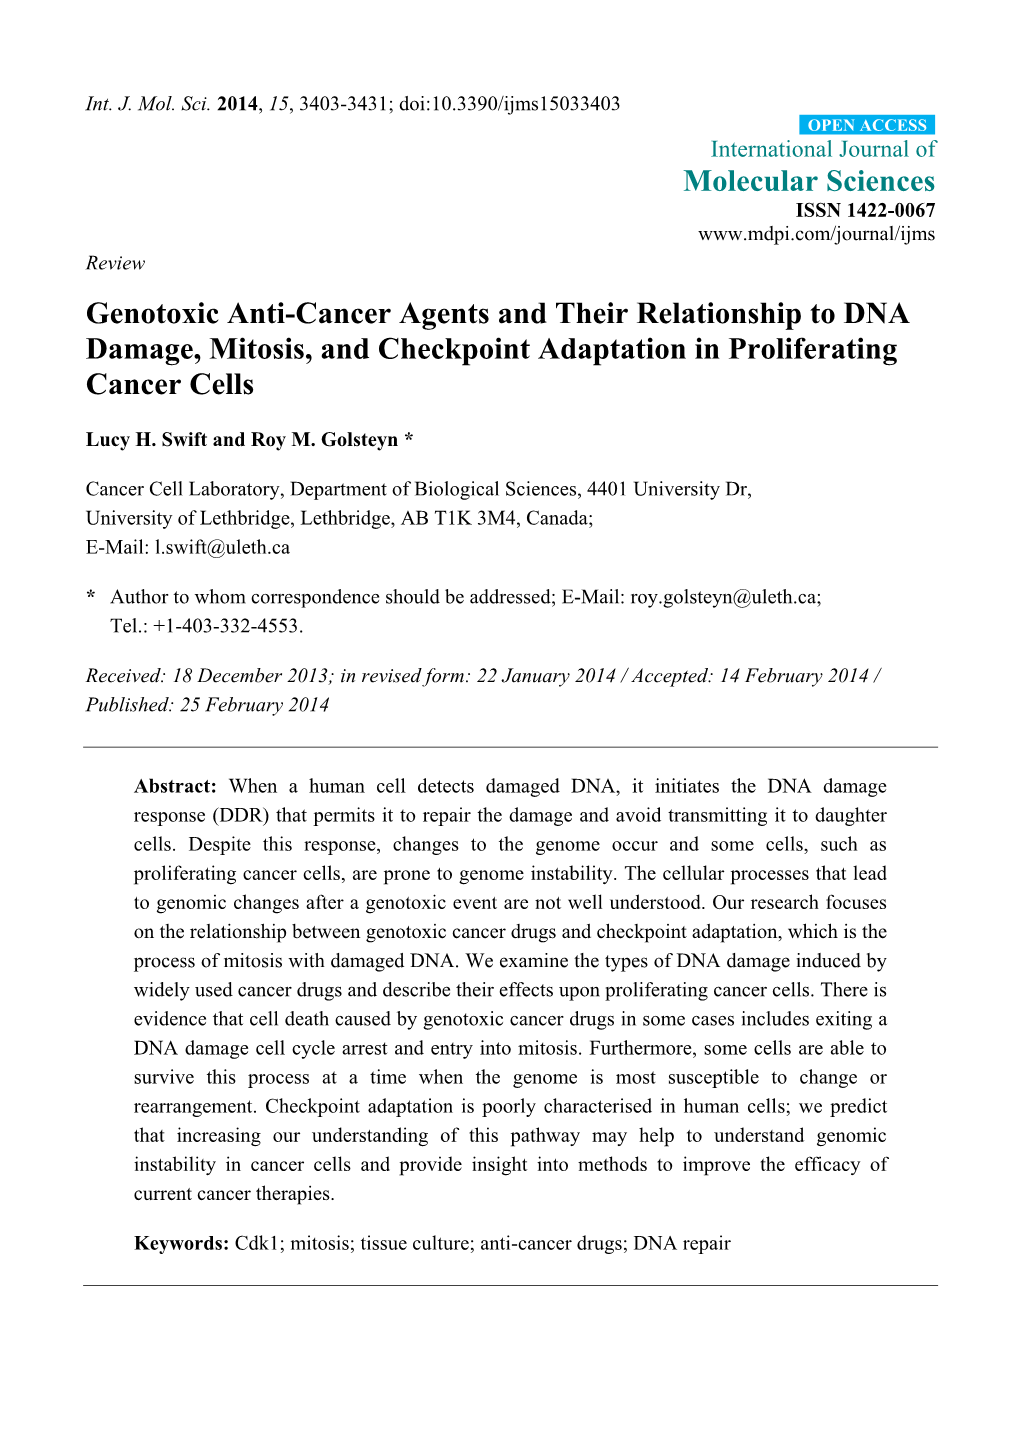 Genotoxic Anti-Cancer Agents and Their Relationship to DNA Damage, Mitosis, and Checkpoint Adaptation in Proliferating Cancer Cells